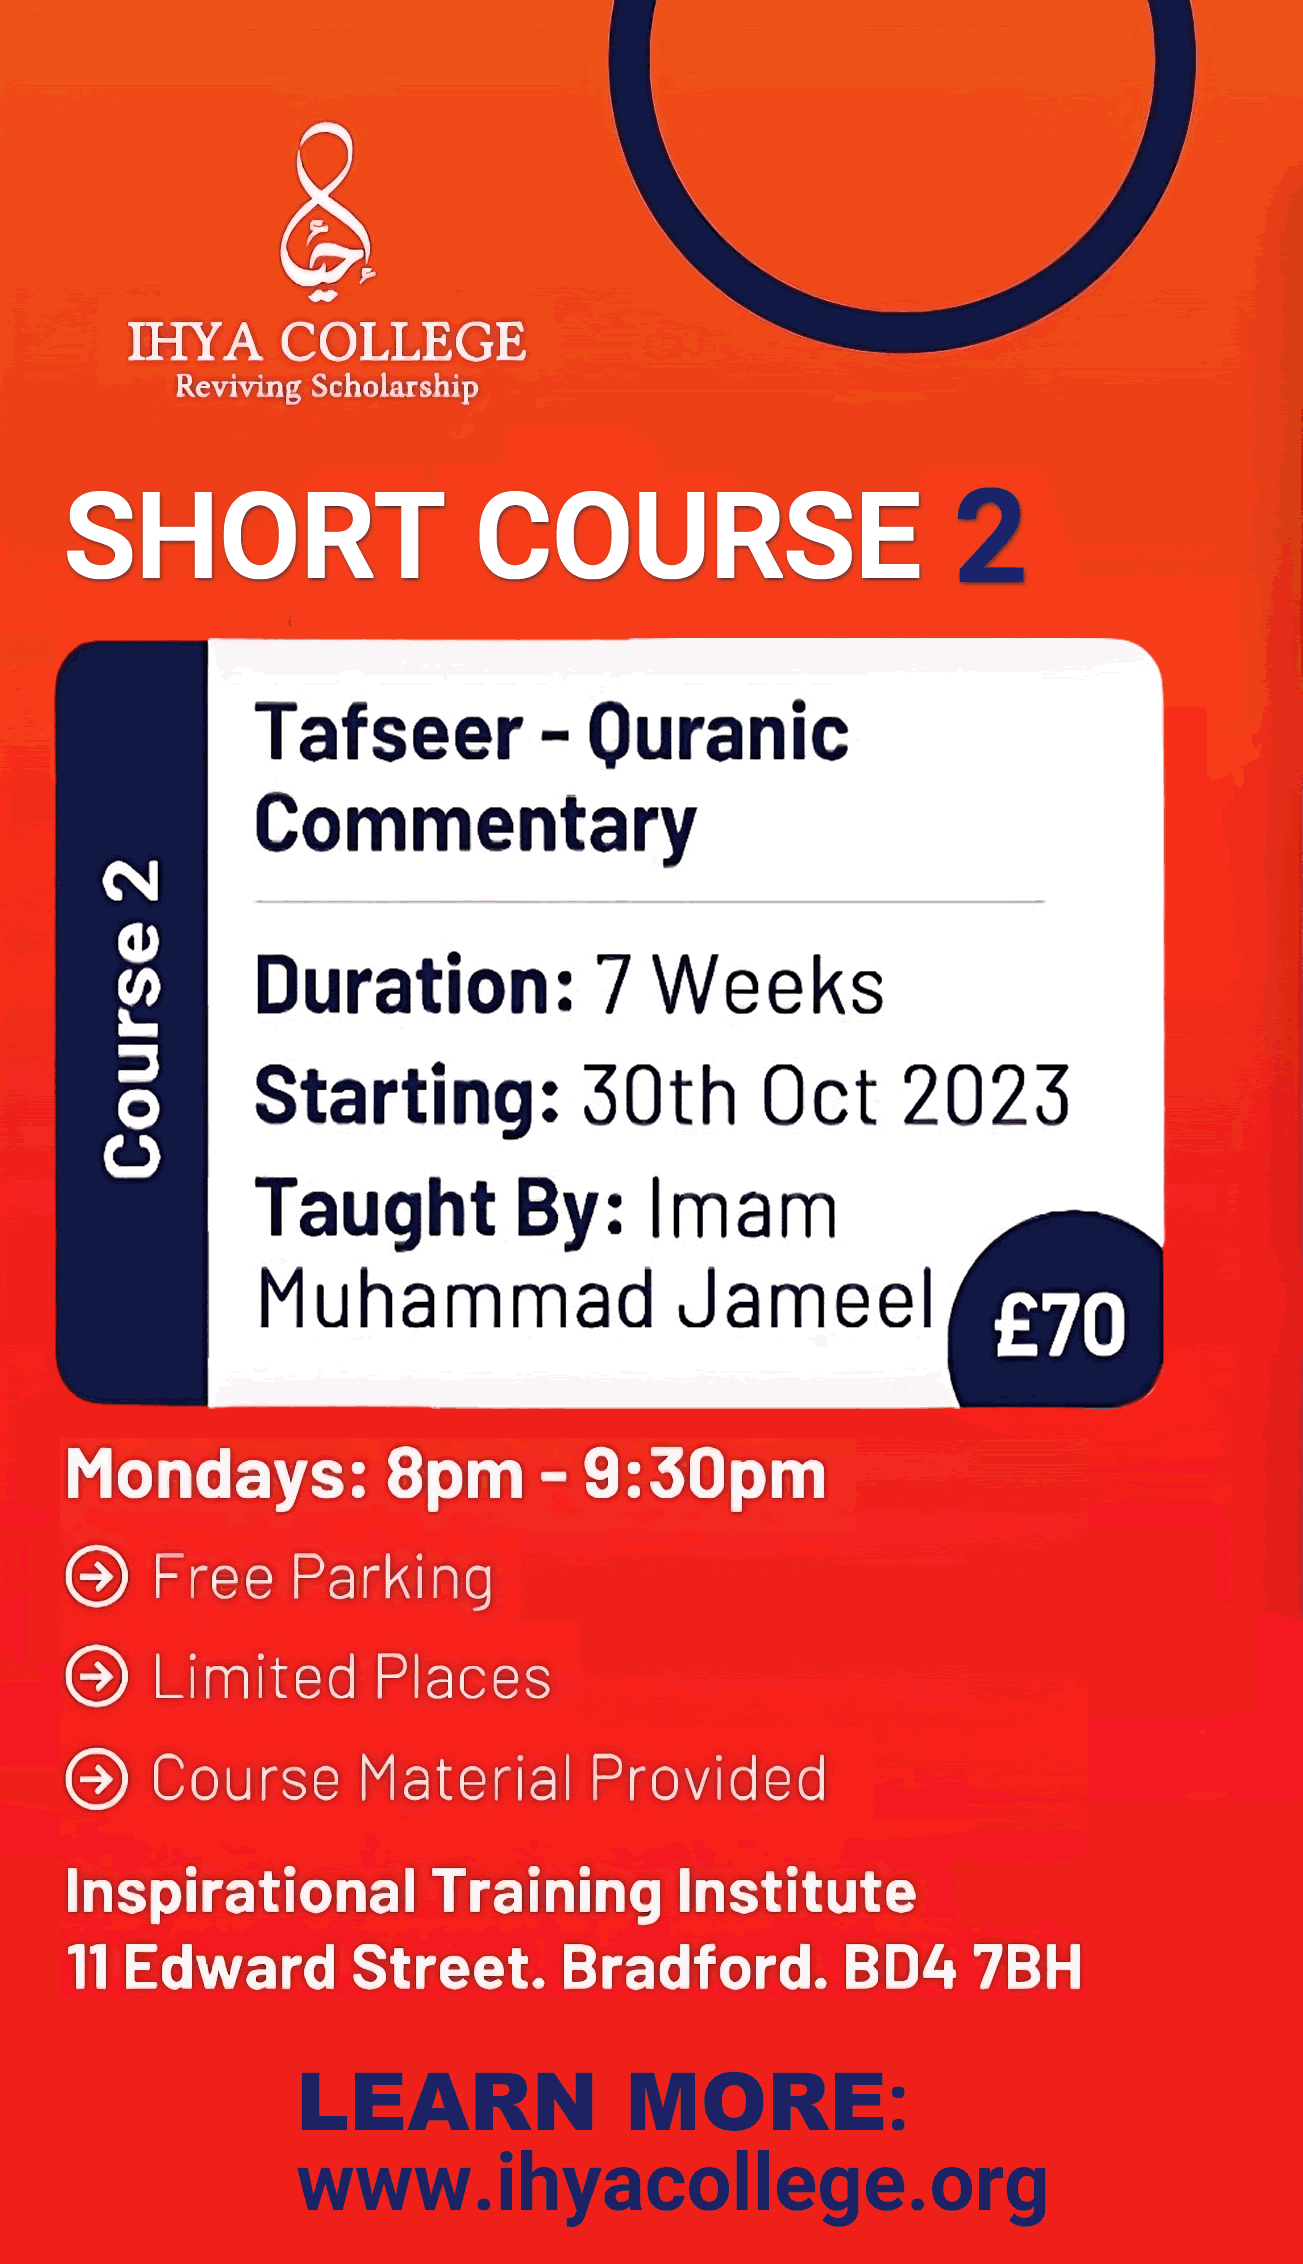 Tafseer Quranic Commentary - Ihya College short course